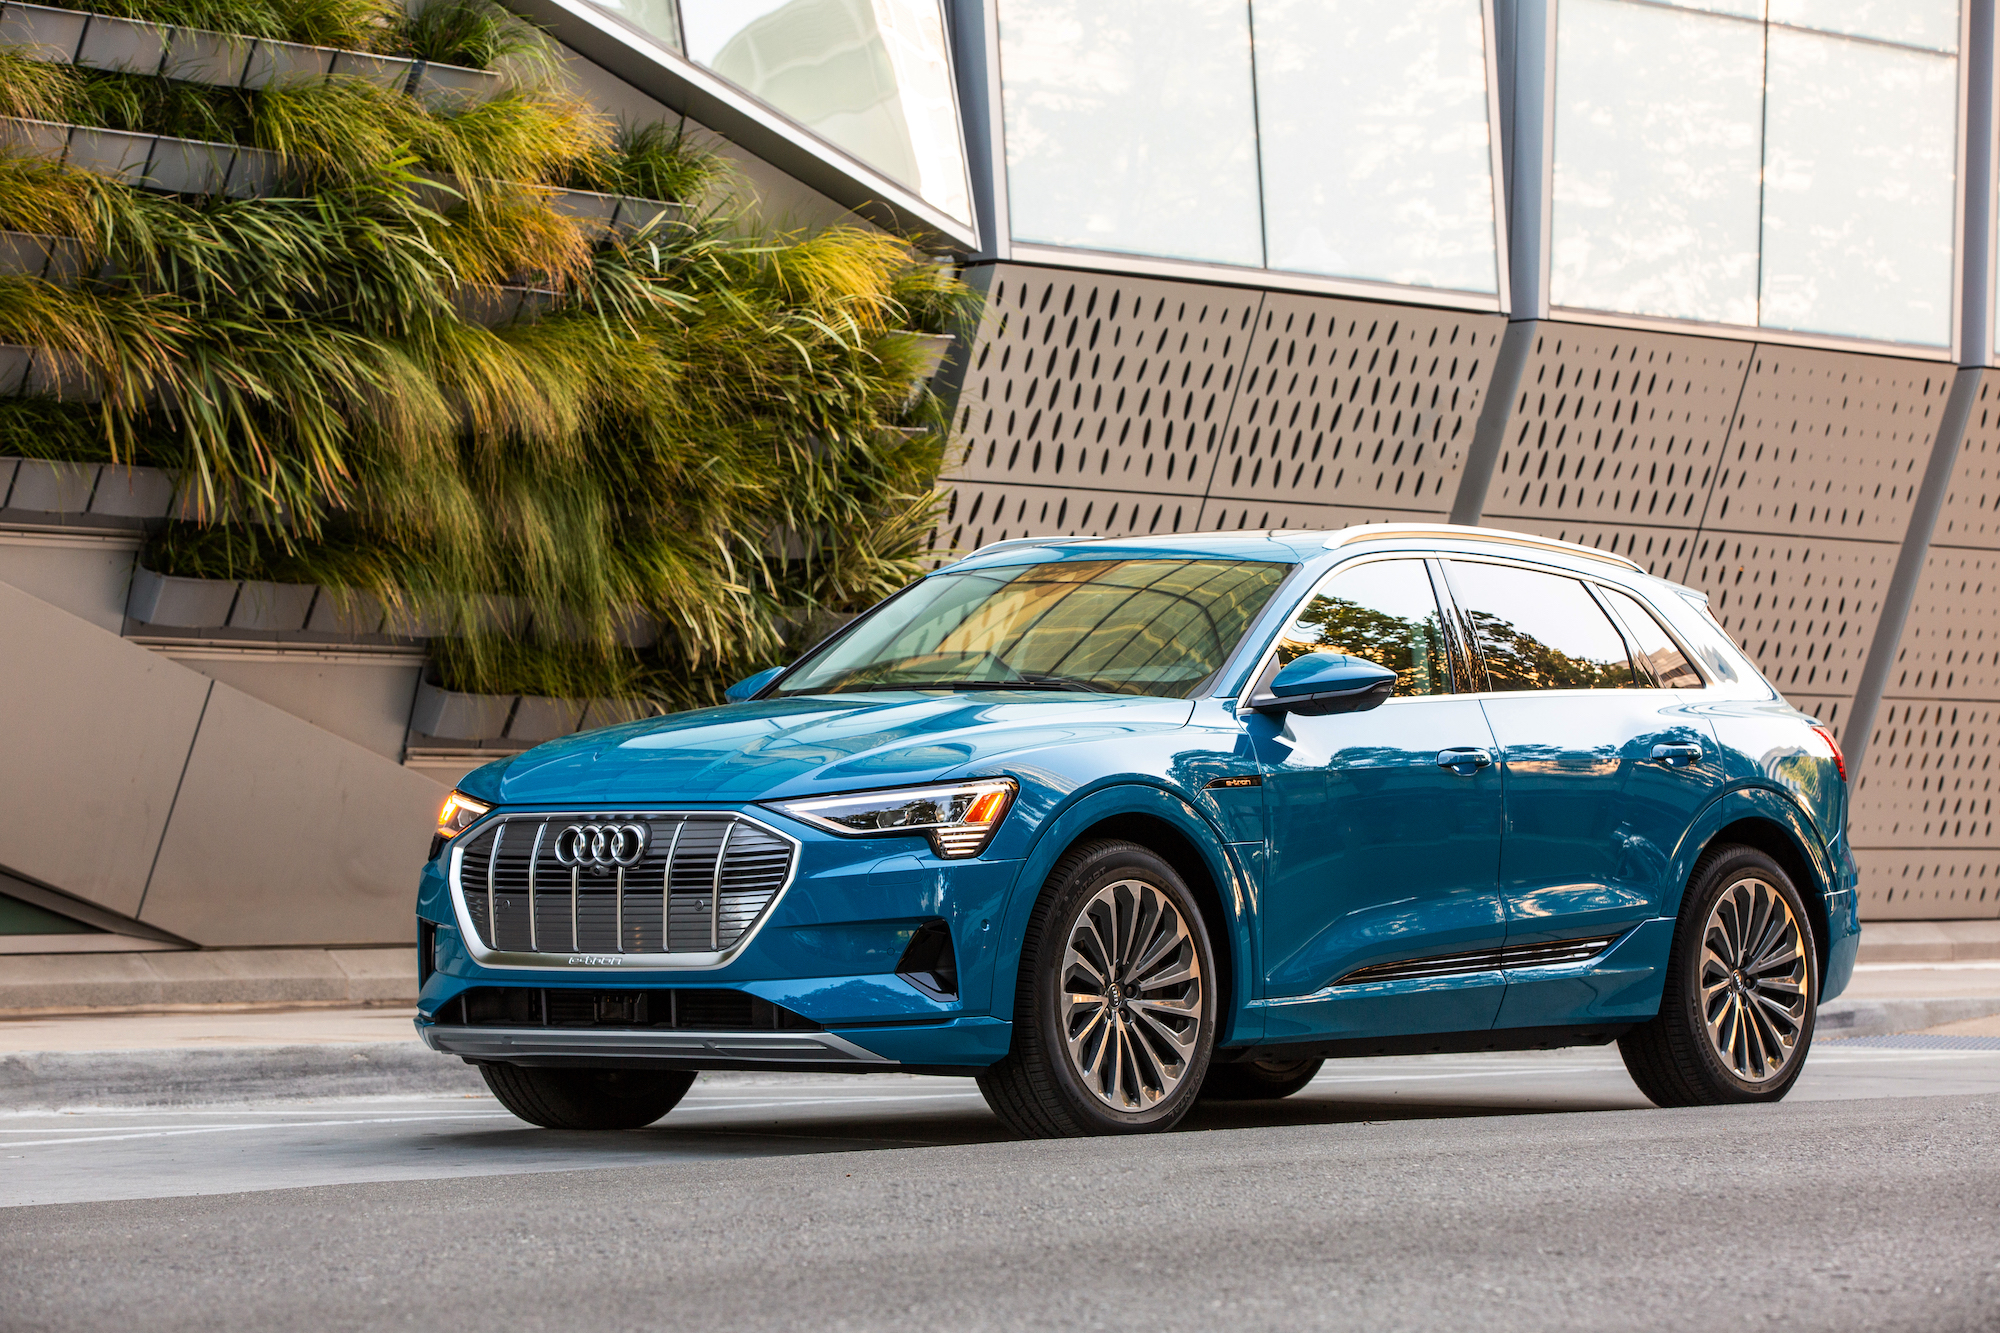 A bright-blue 2019 Audi e-tron electric crossover SUV parked on a street outside a modern building